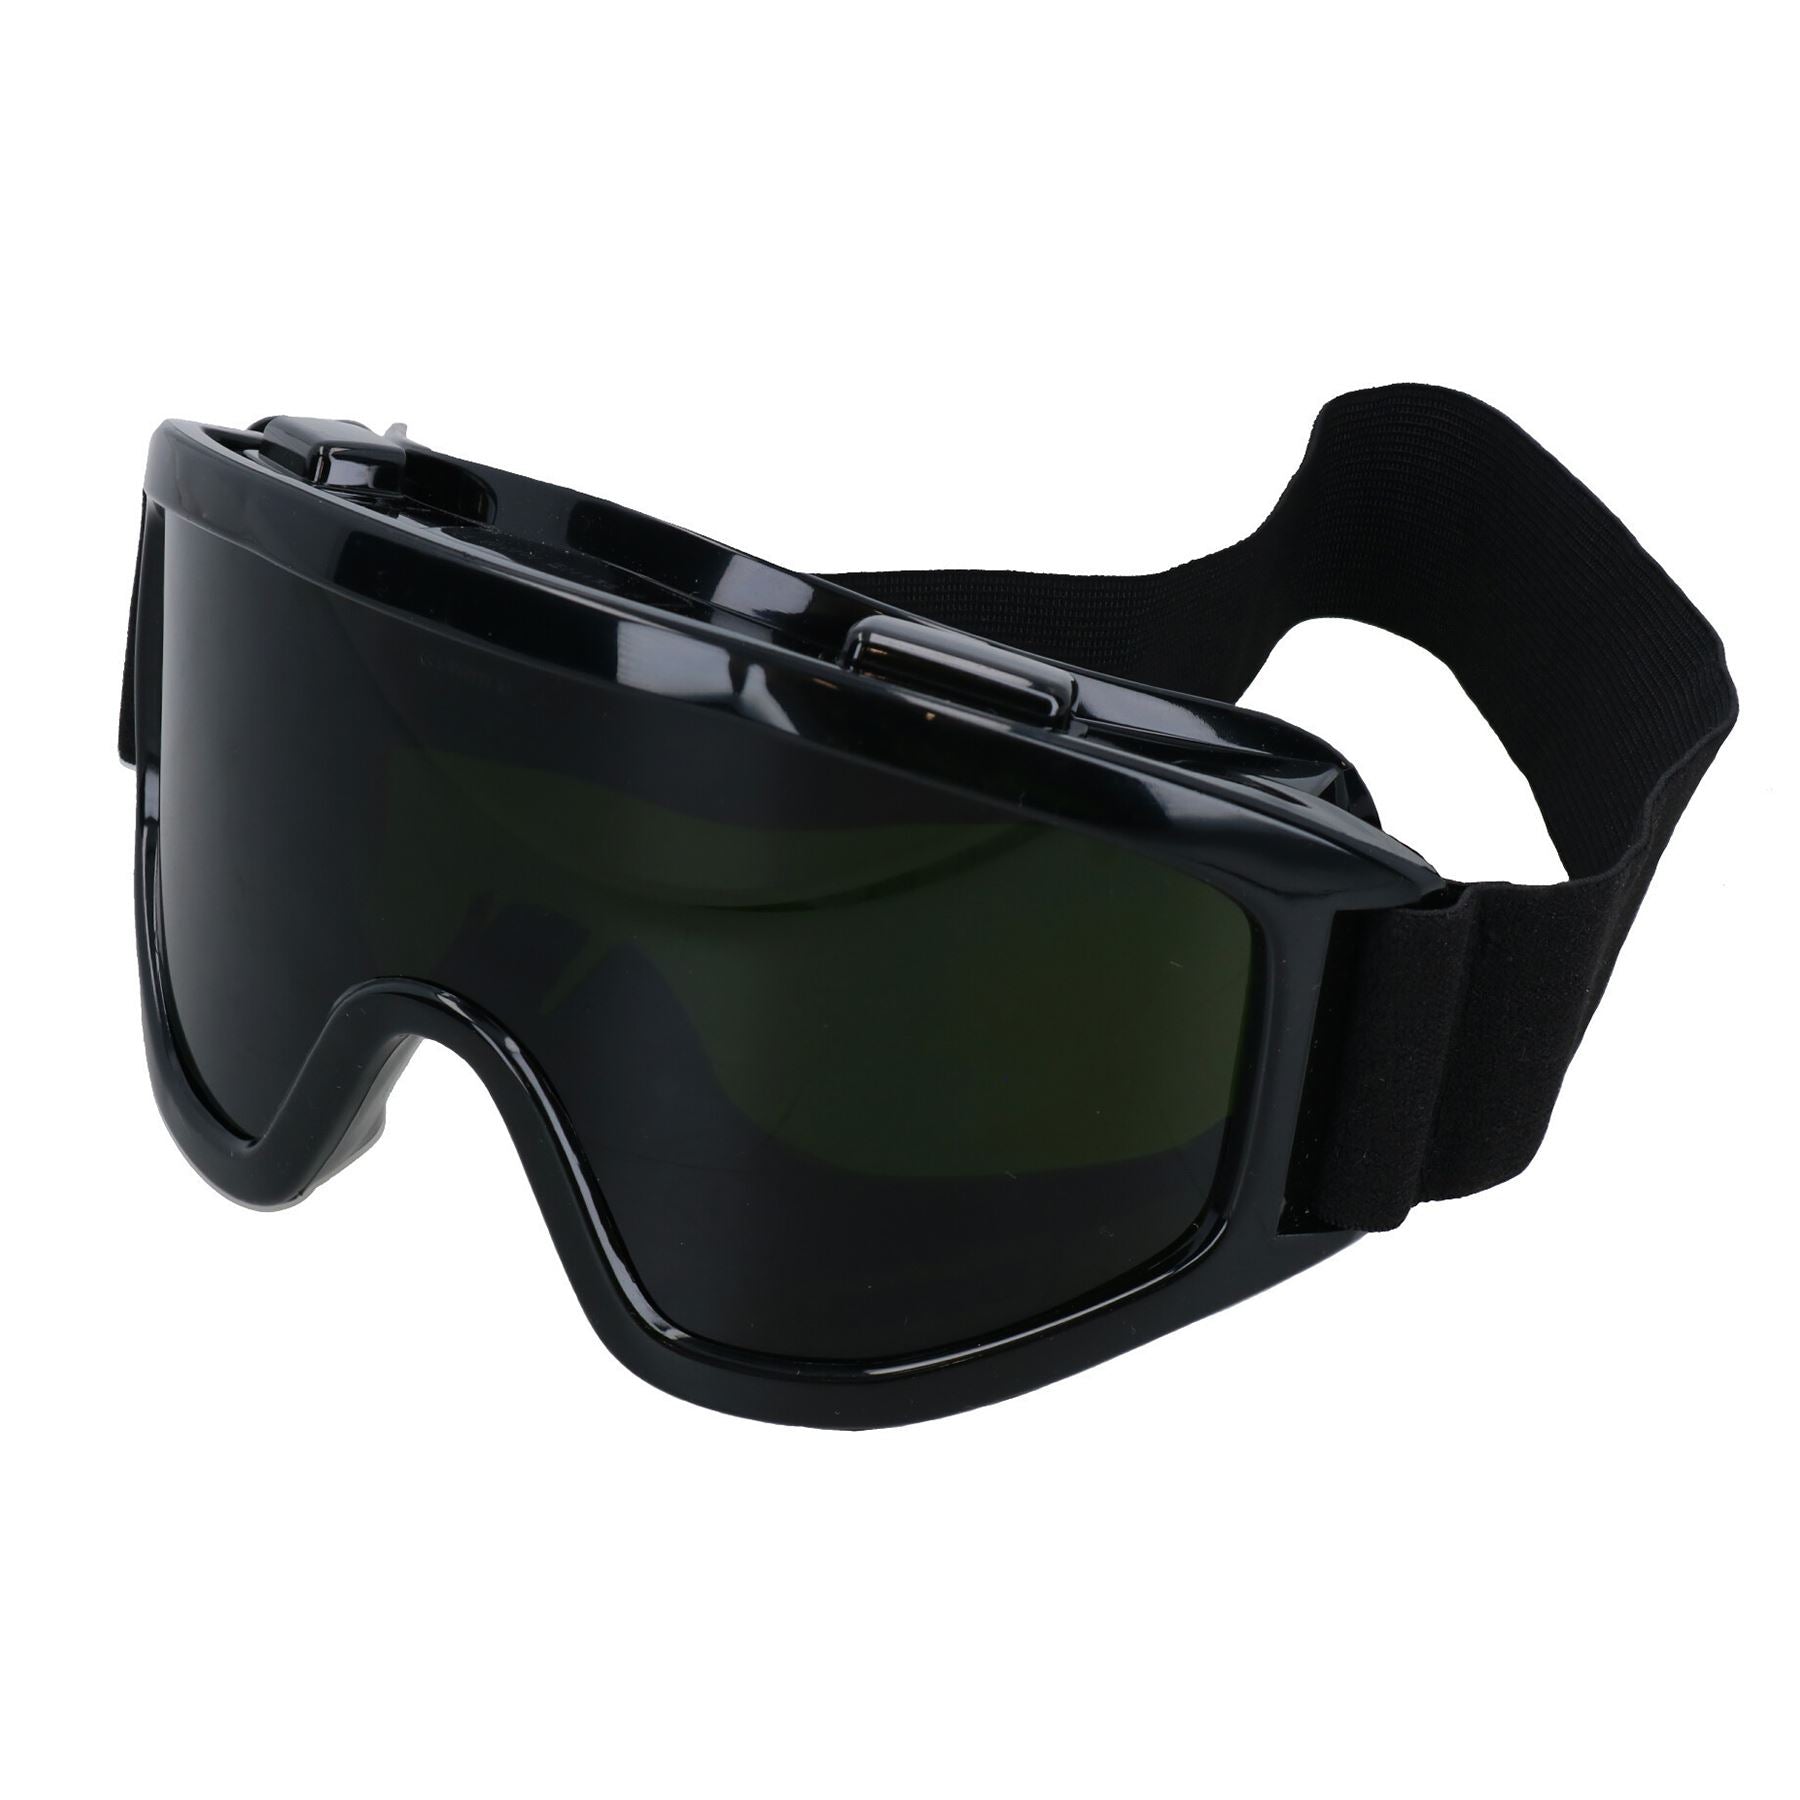 Welding Goggles Glasses Mask Wide Vision Welder Safety Protection Ski Style